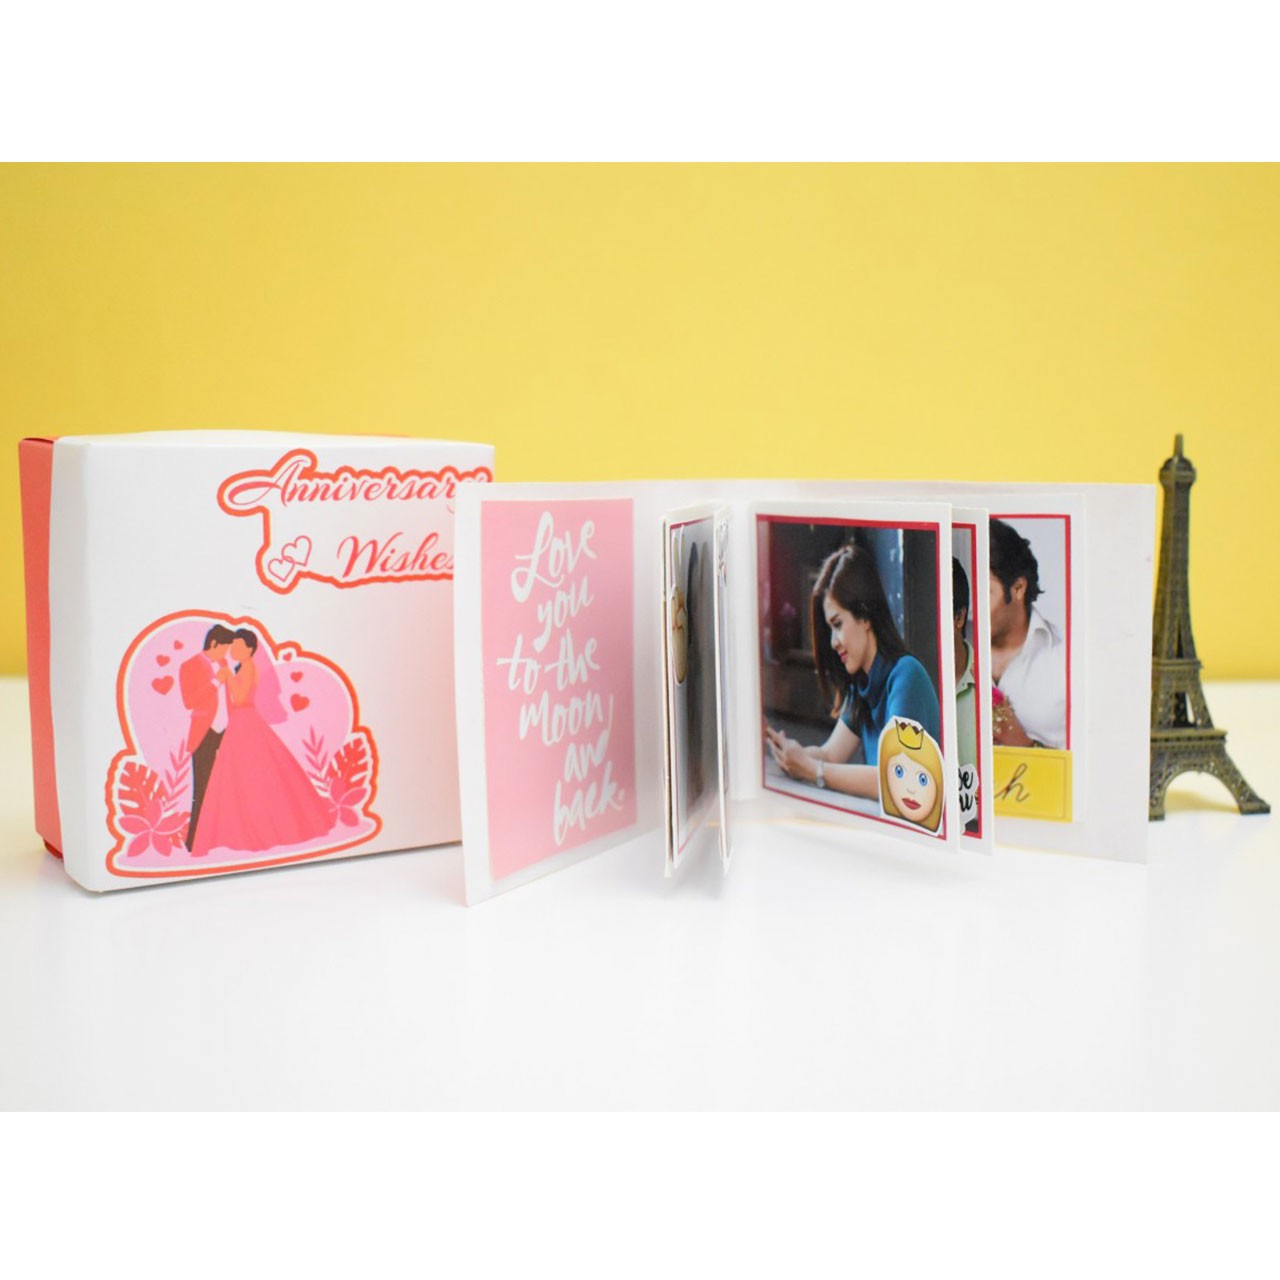 Personalized Hand Crafted Miniature Anniversary Album